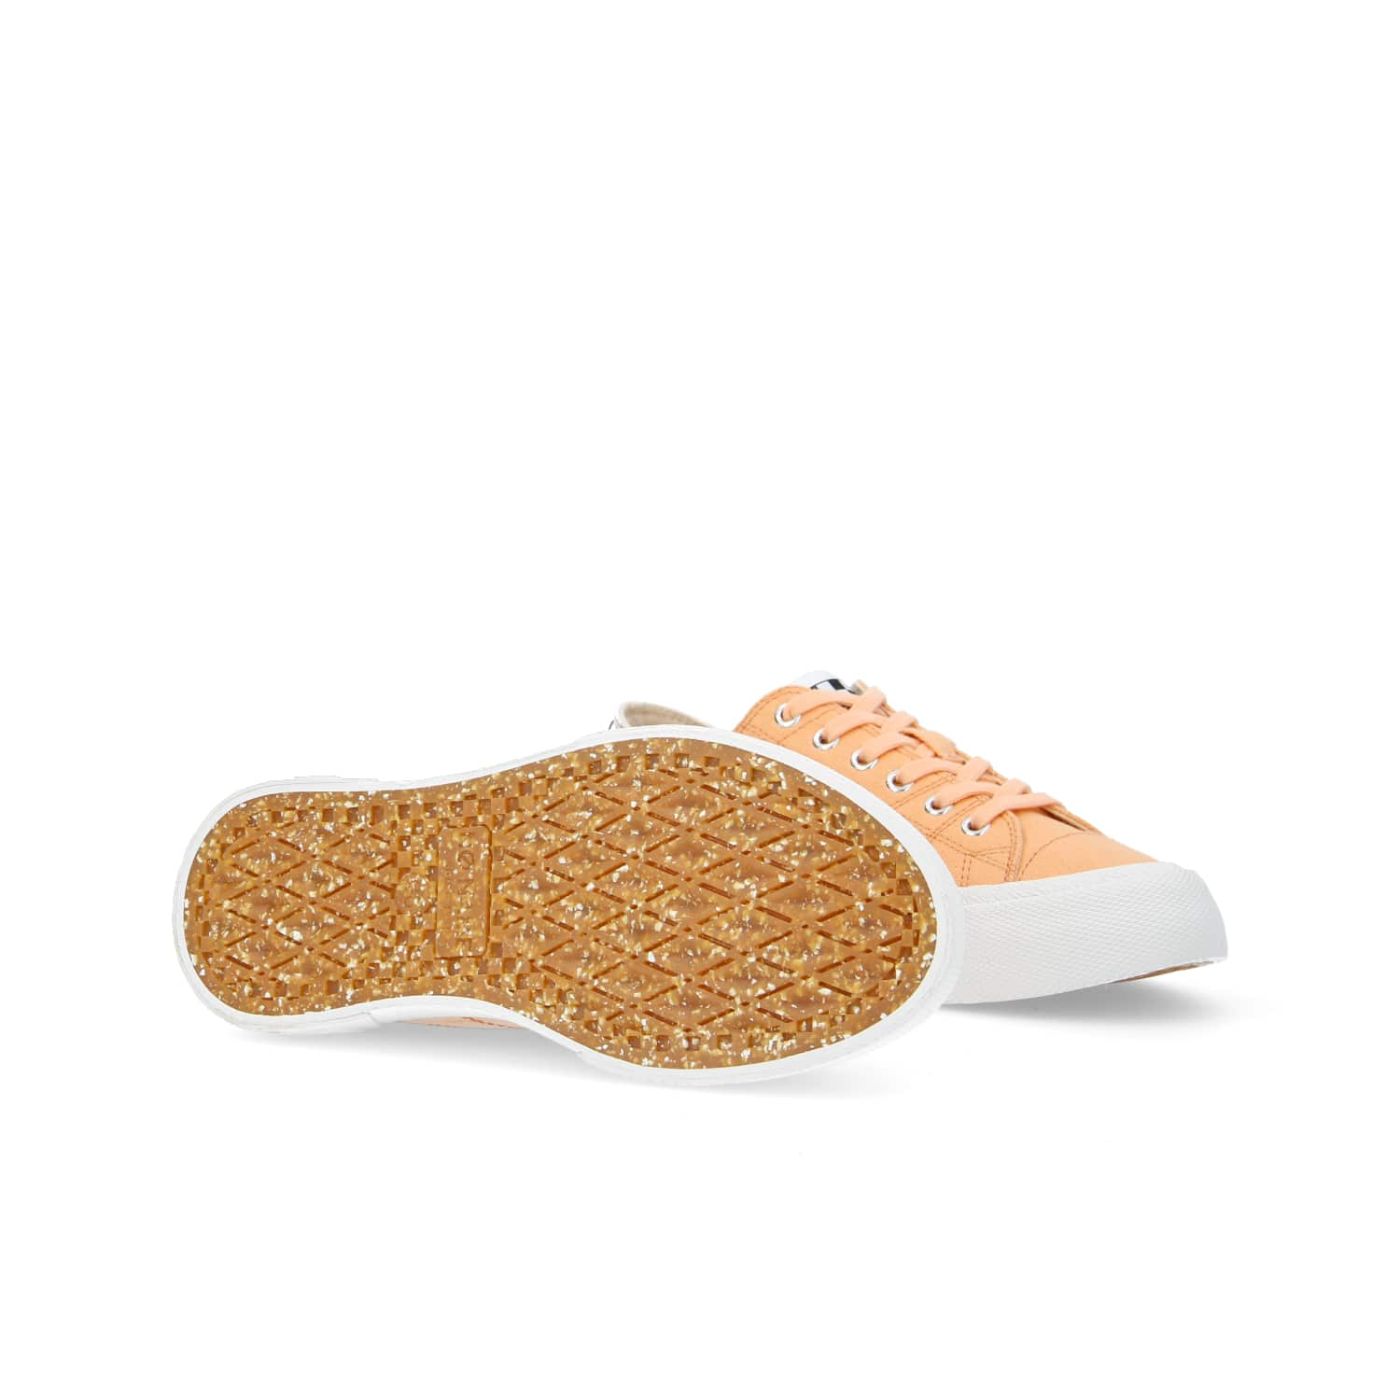 RESET SNEAKER W - CANVAS RECYCLED - APRICOT